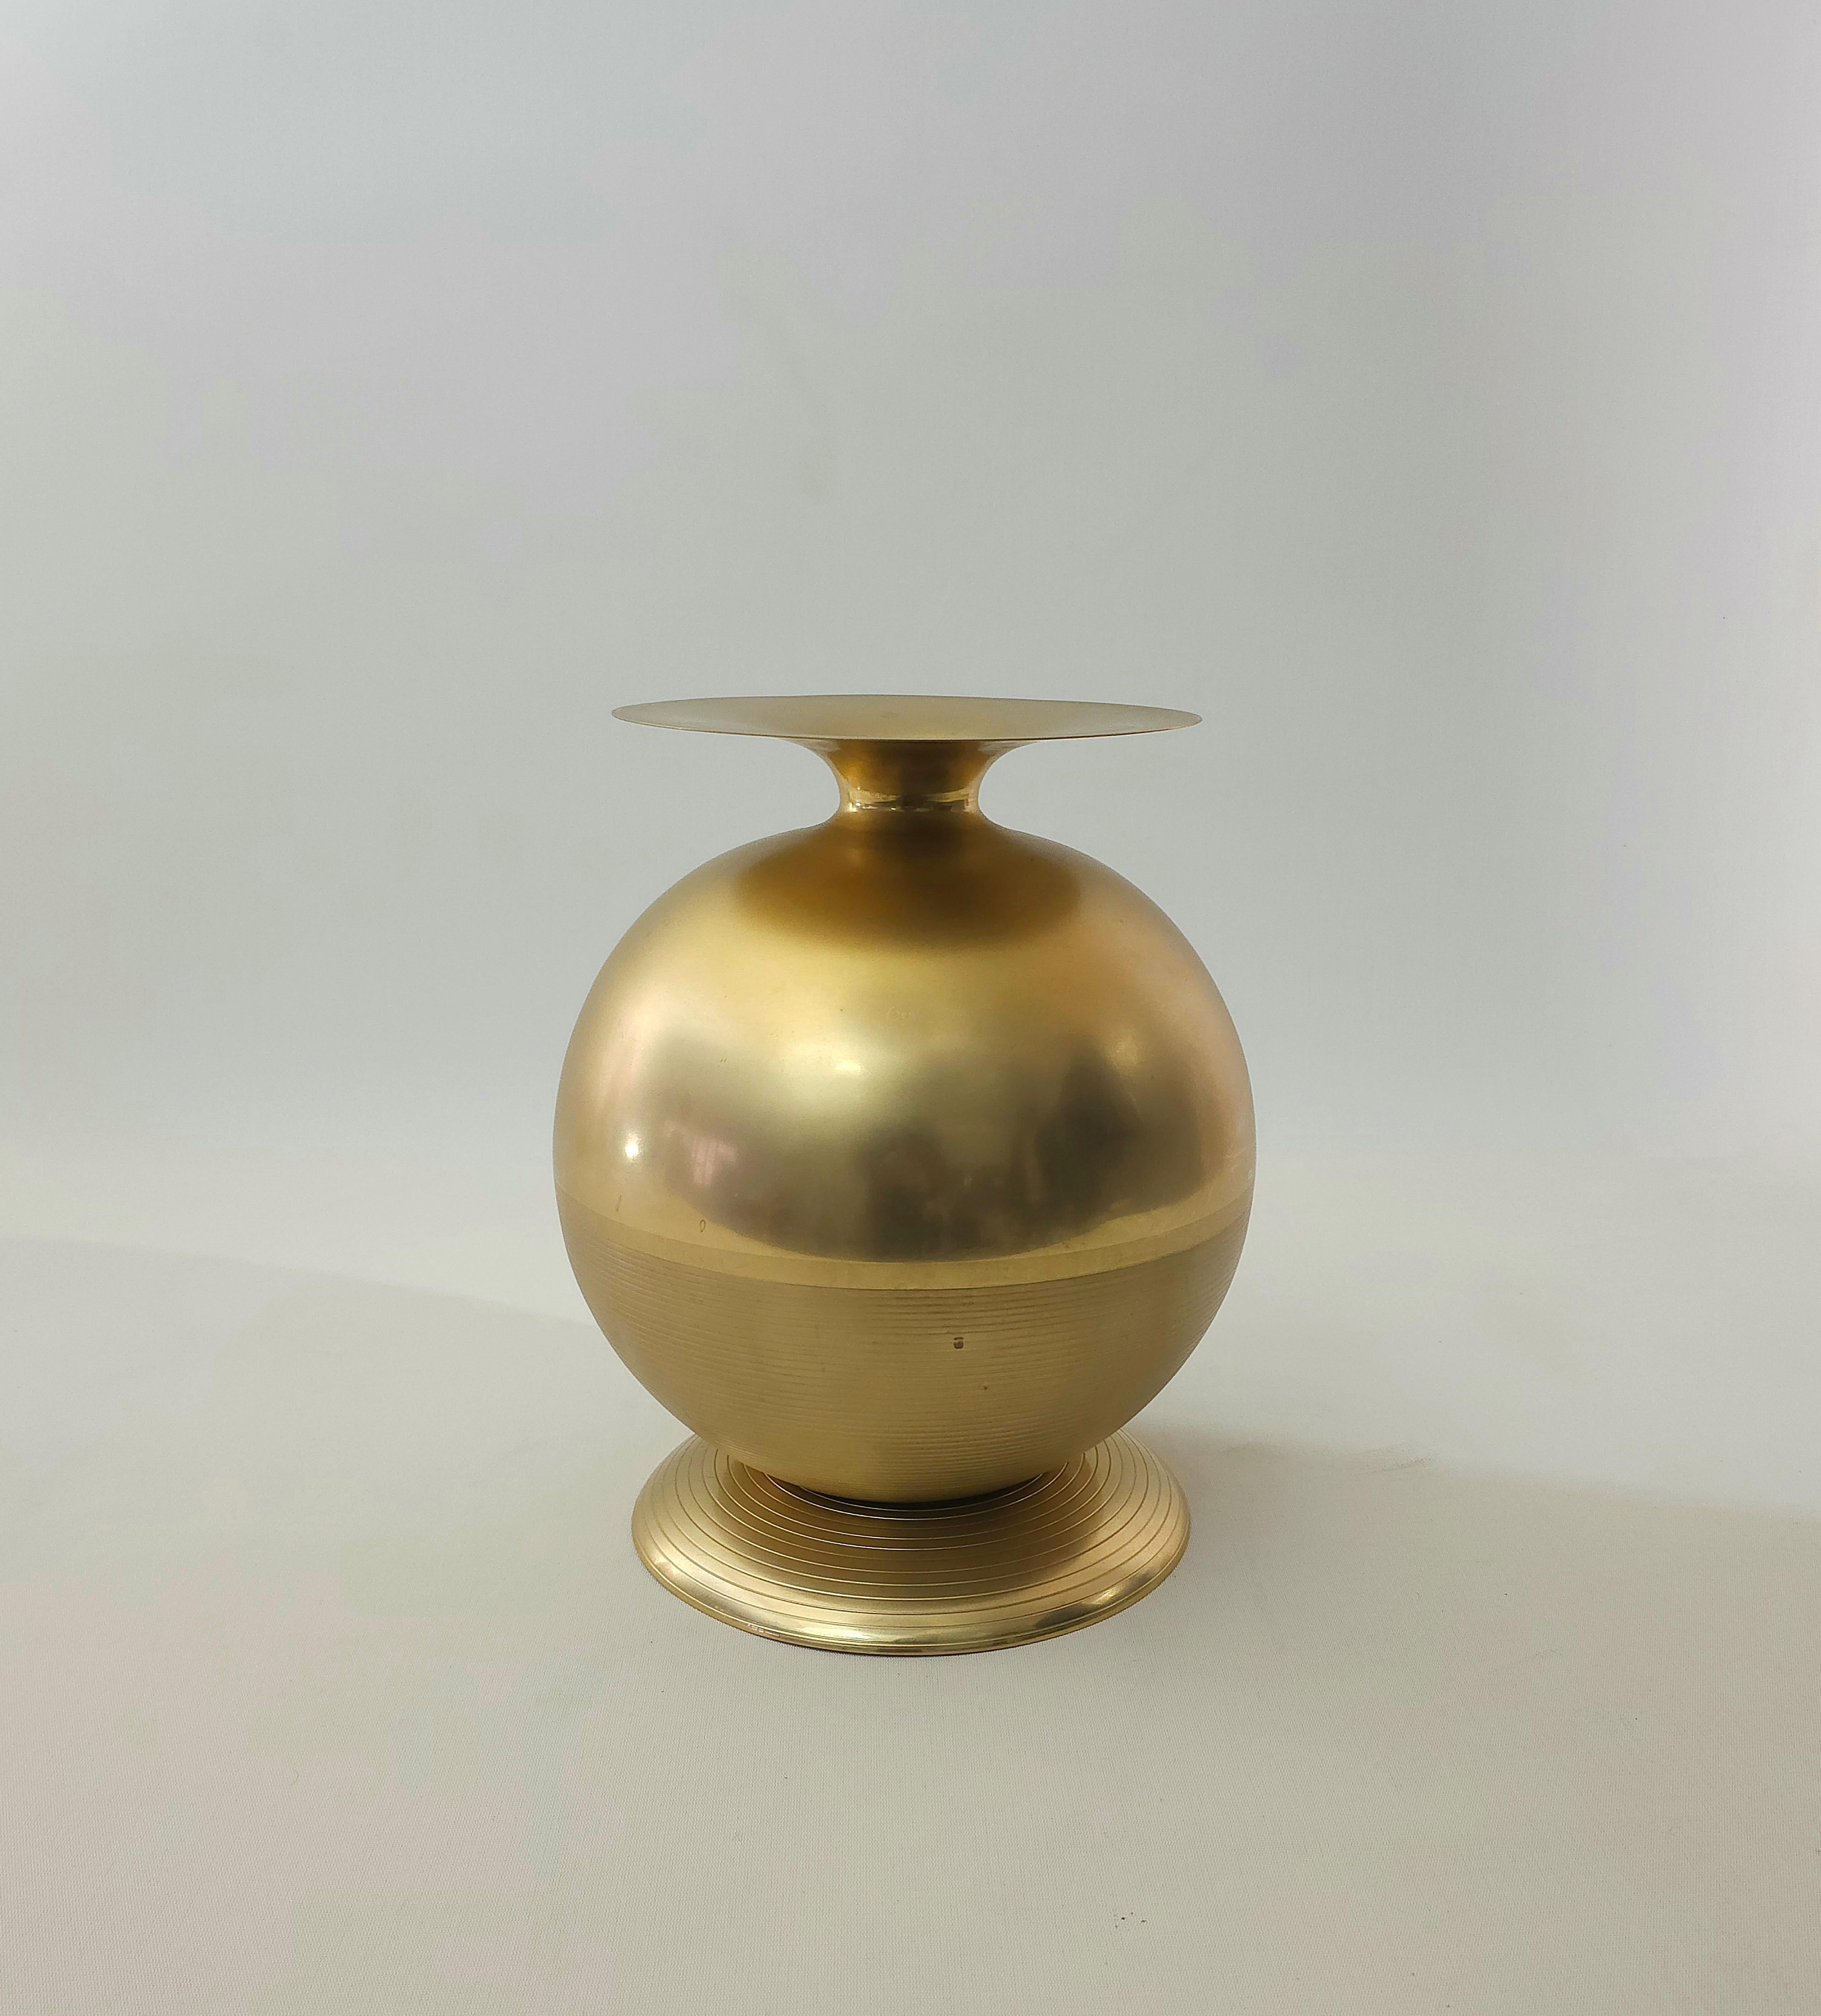 Italian Decorative Object Vase Brass Style of Gabriella Crespi Midcentury Italy 1960s For Sale